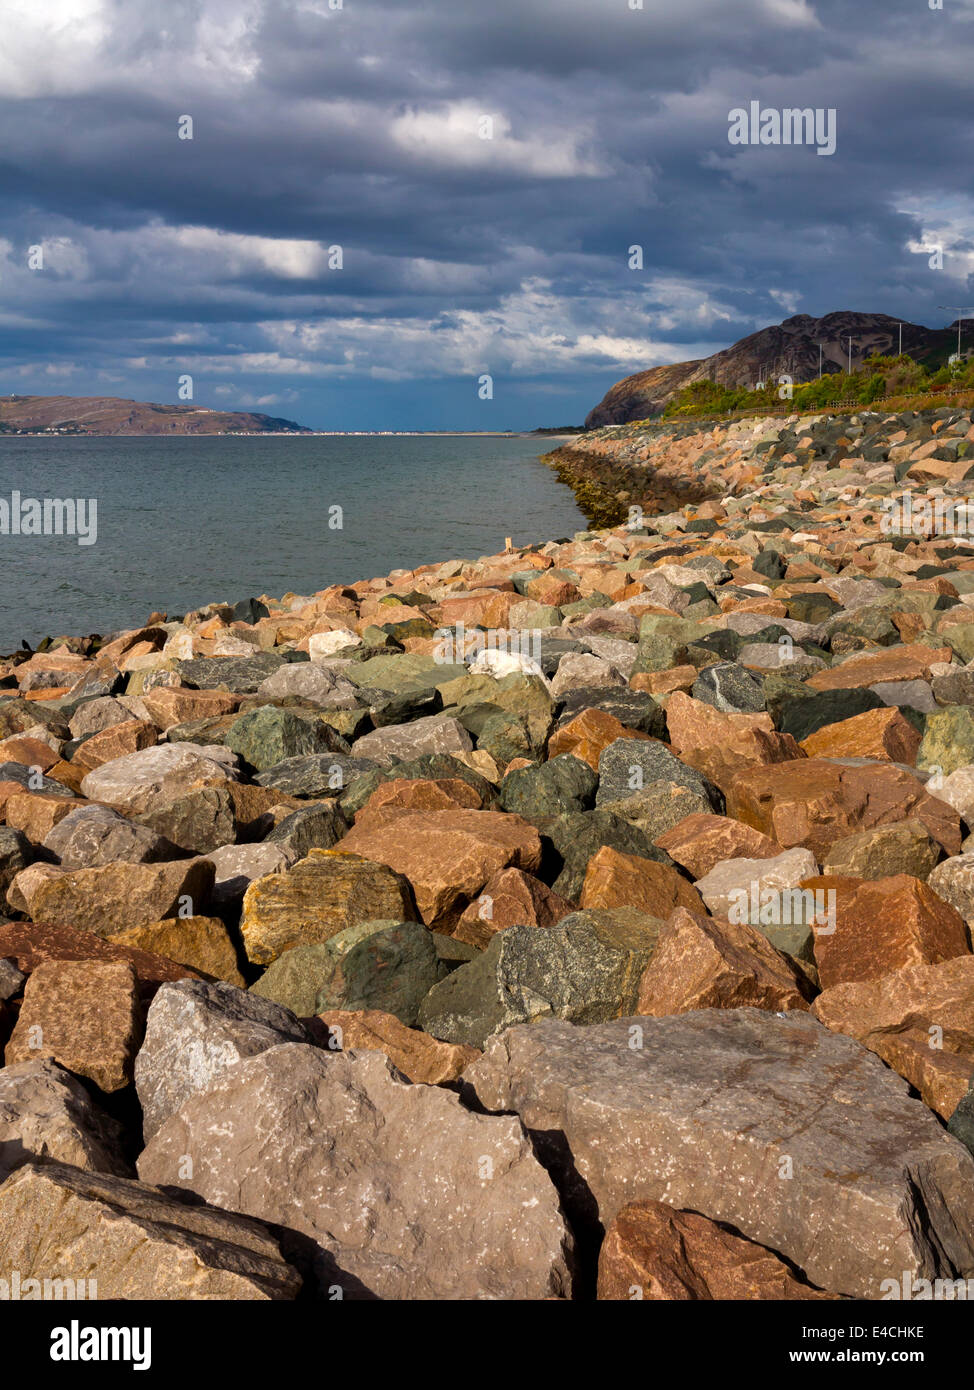 Sea defences on the North Wales coastline at Penmaenmawr in Conwy with large rocks and boulders used to prevent coastal erosion Stock Photo